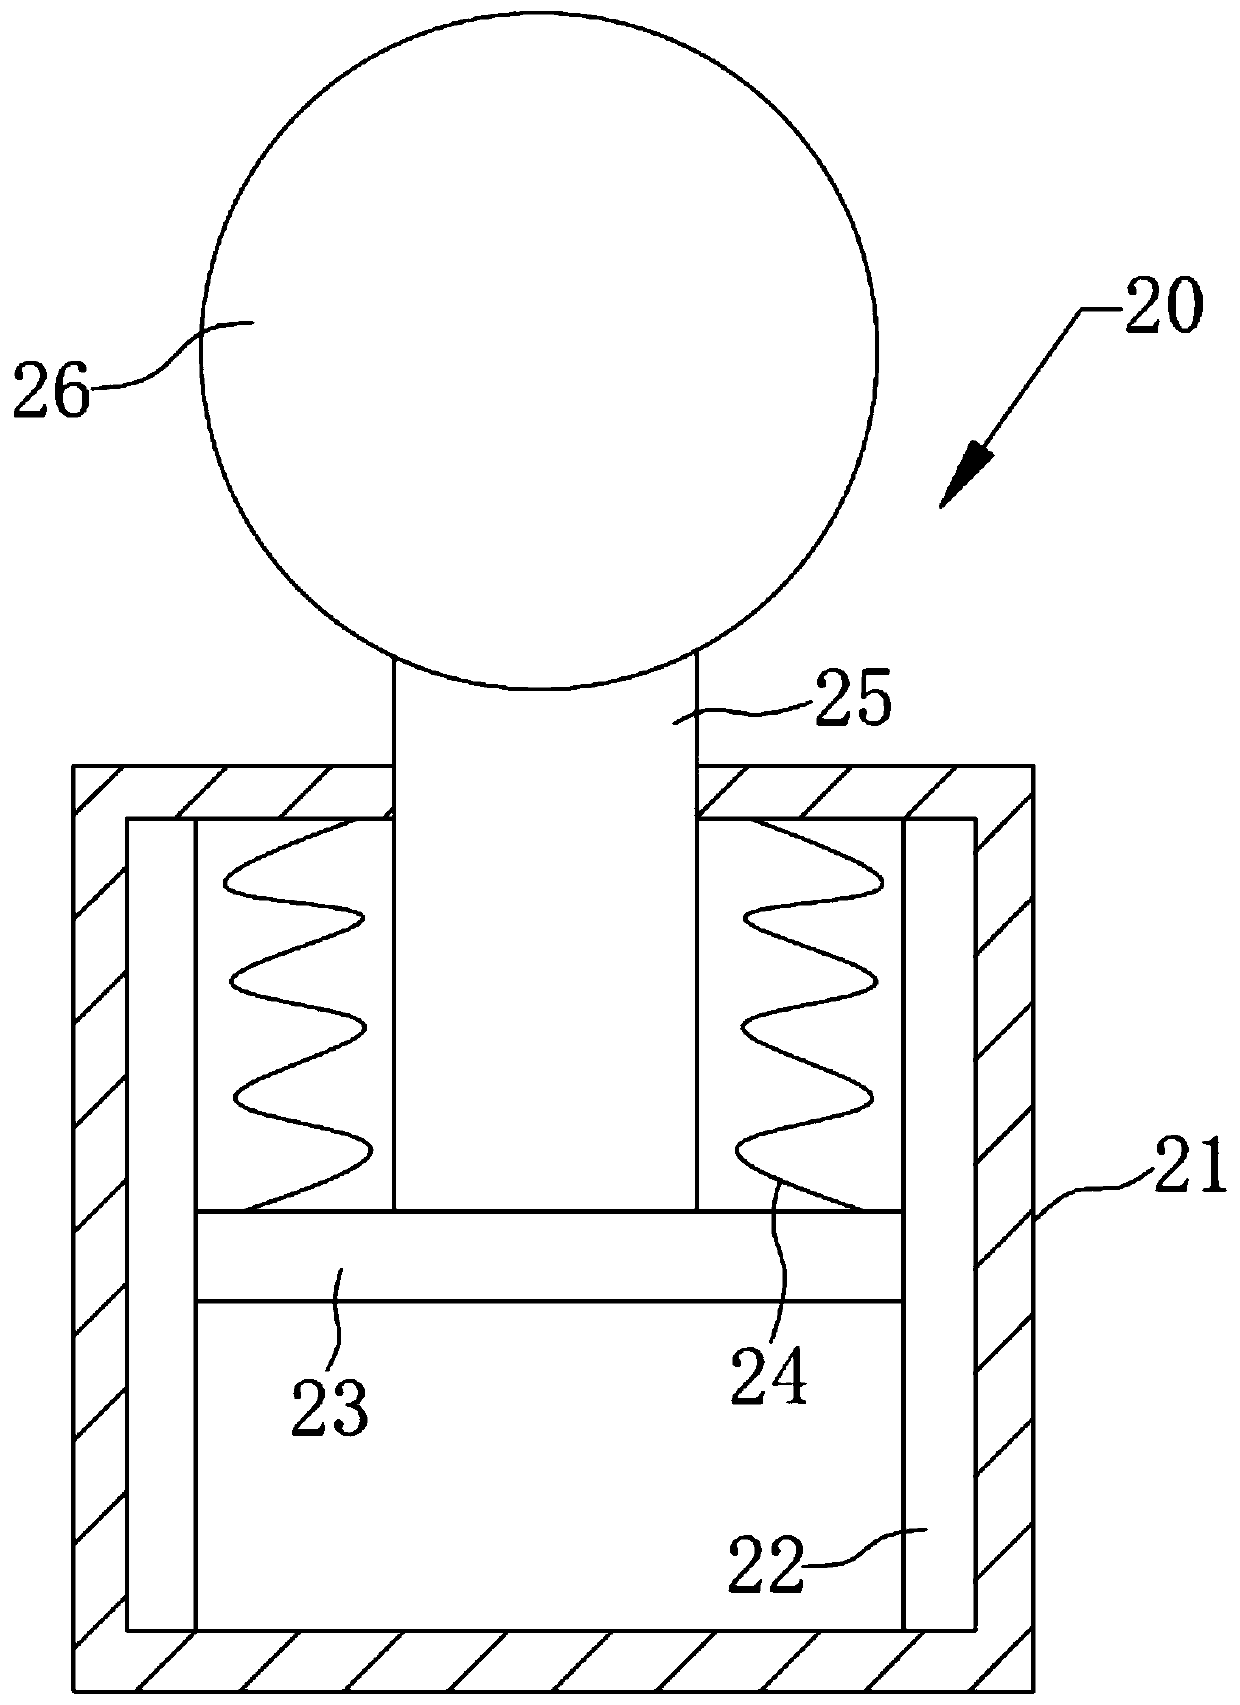 Transferring box capable of adjusting size of inner chamber